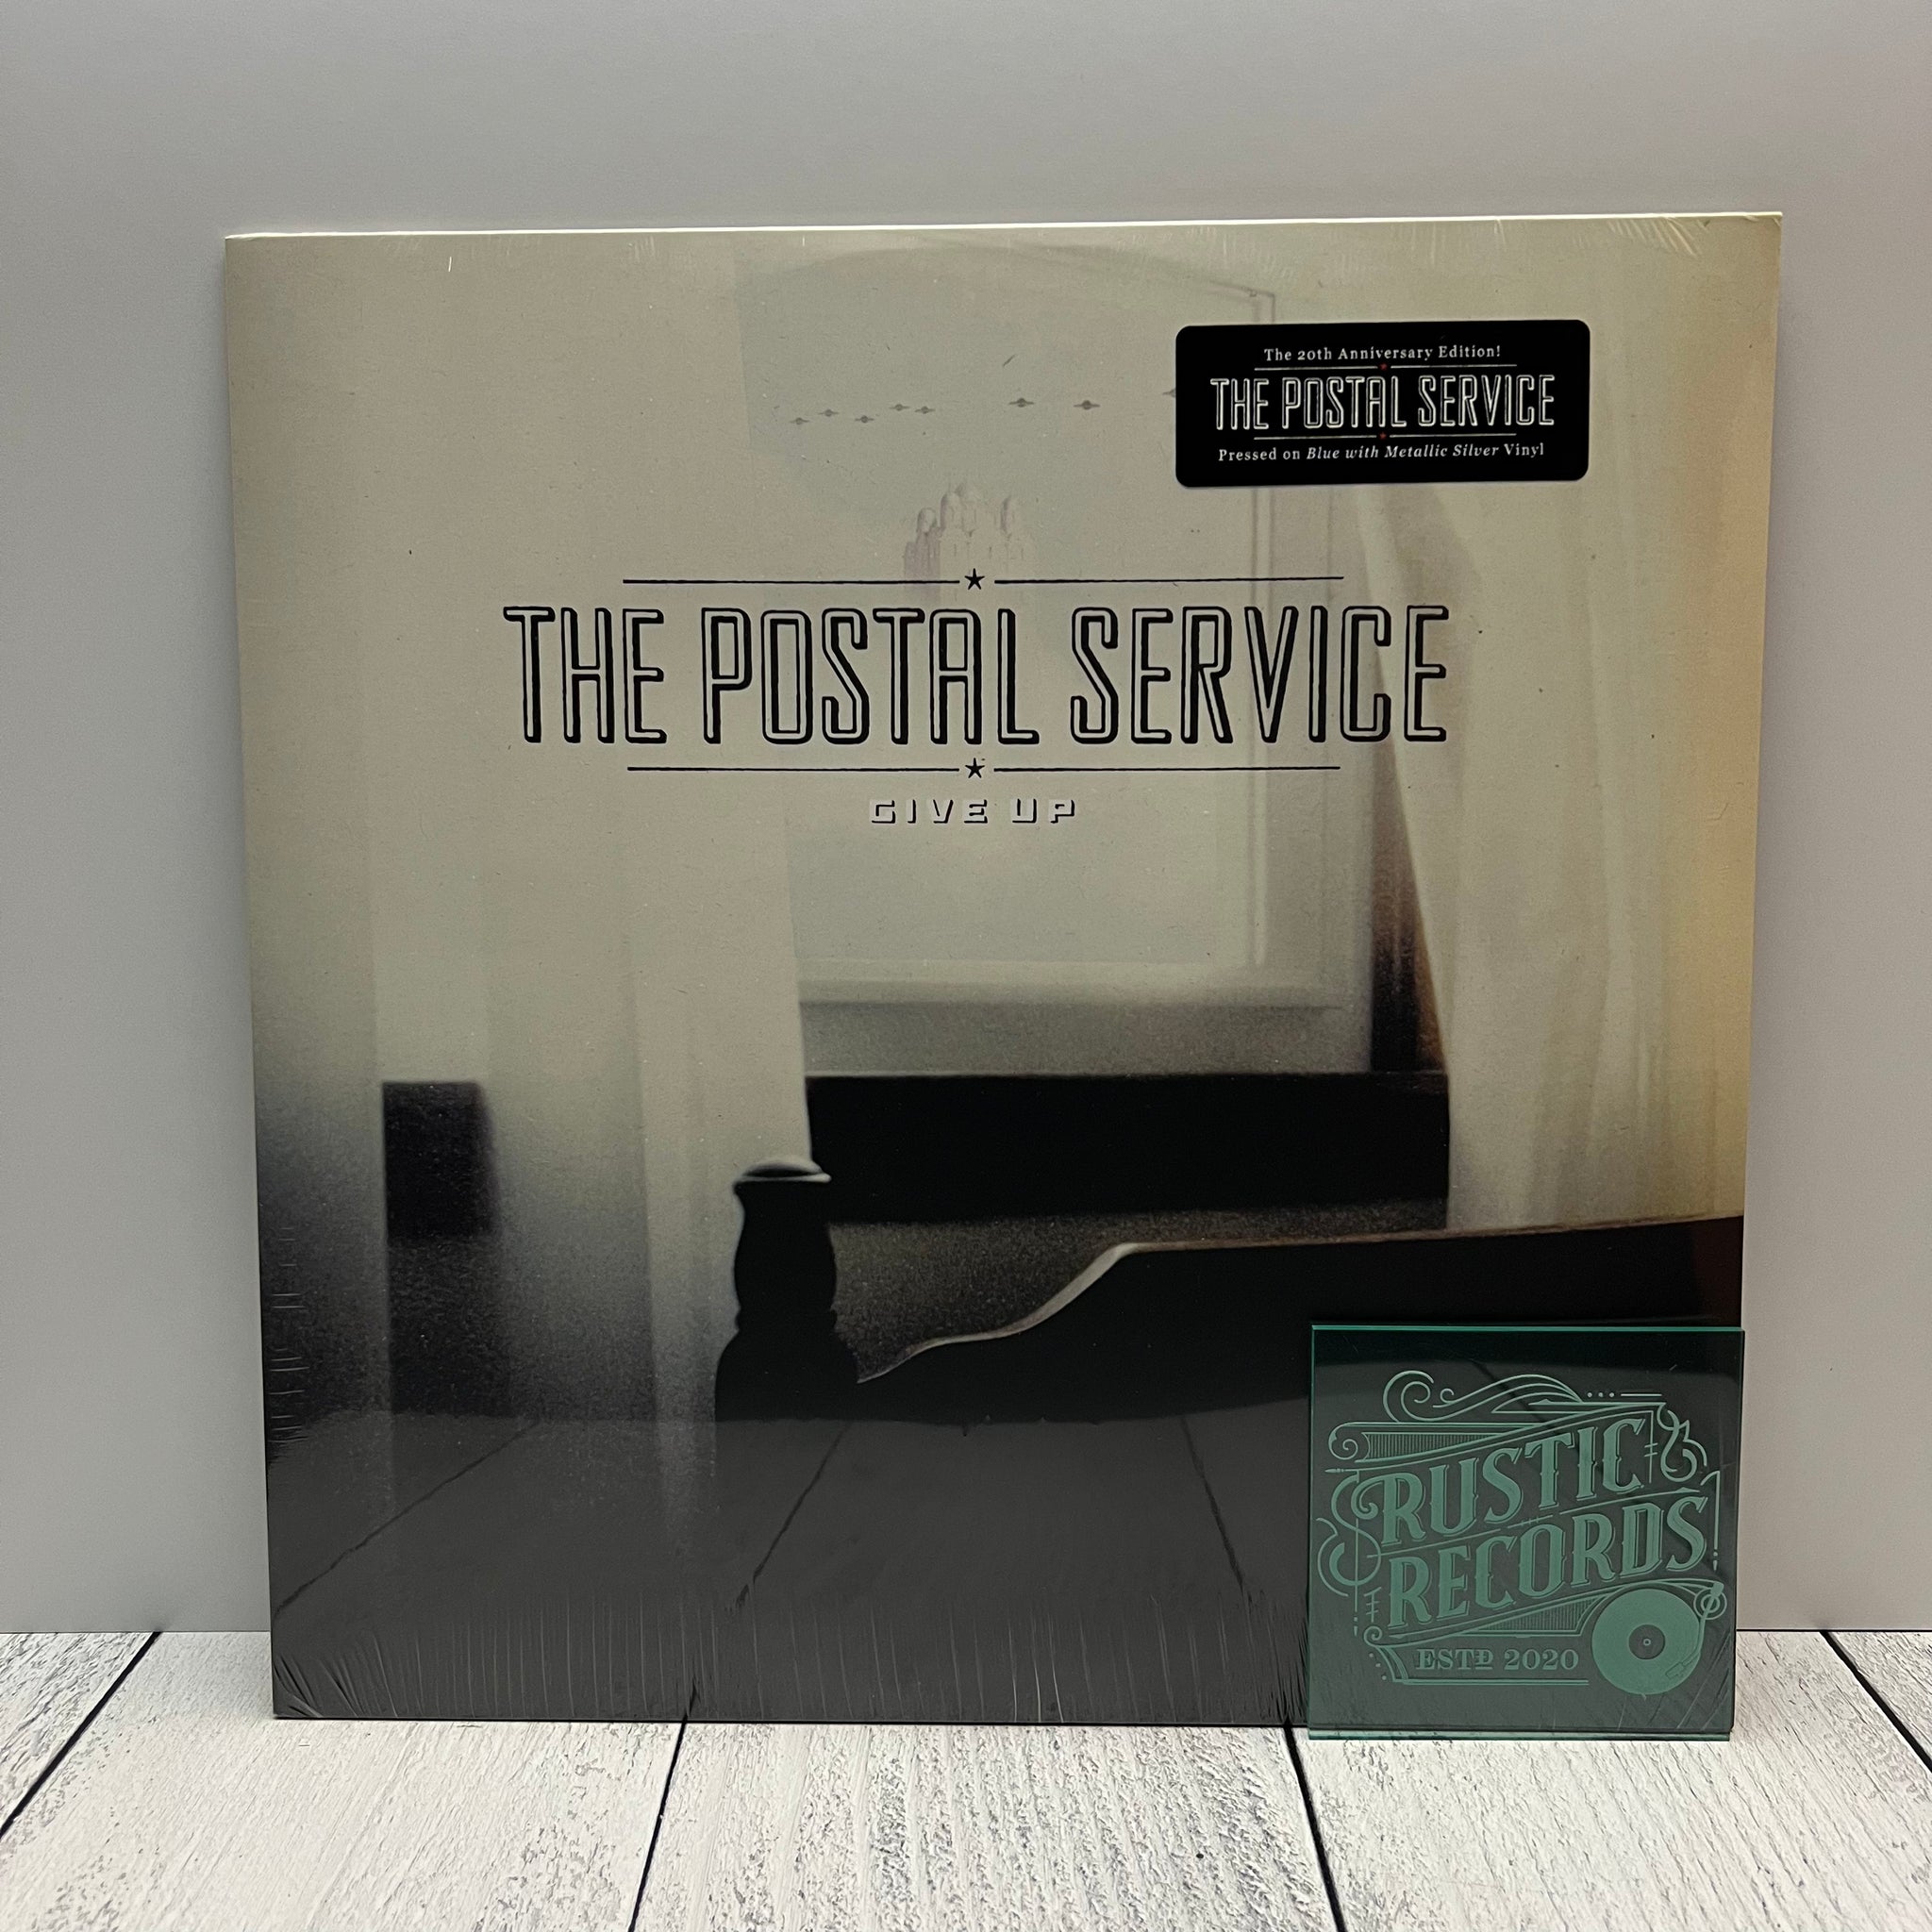 The Postal Service - Give Up 20th Anniversary (Blue with Metallic Silver Vinyl)